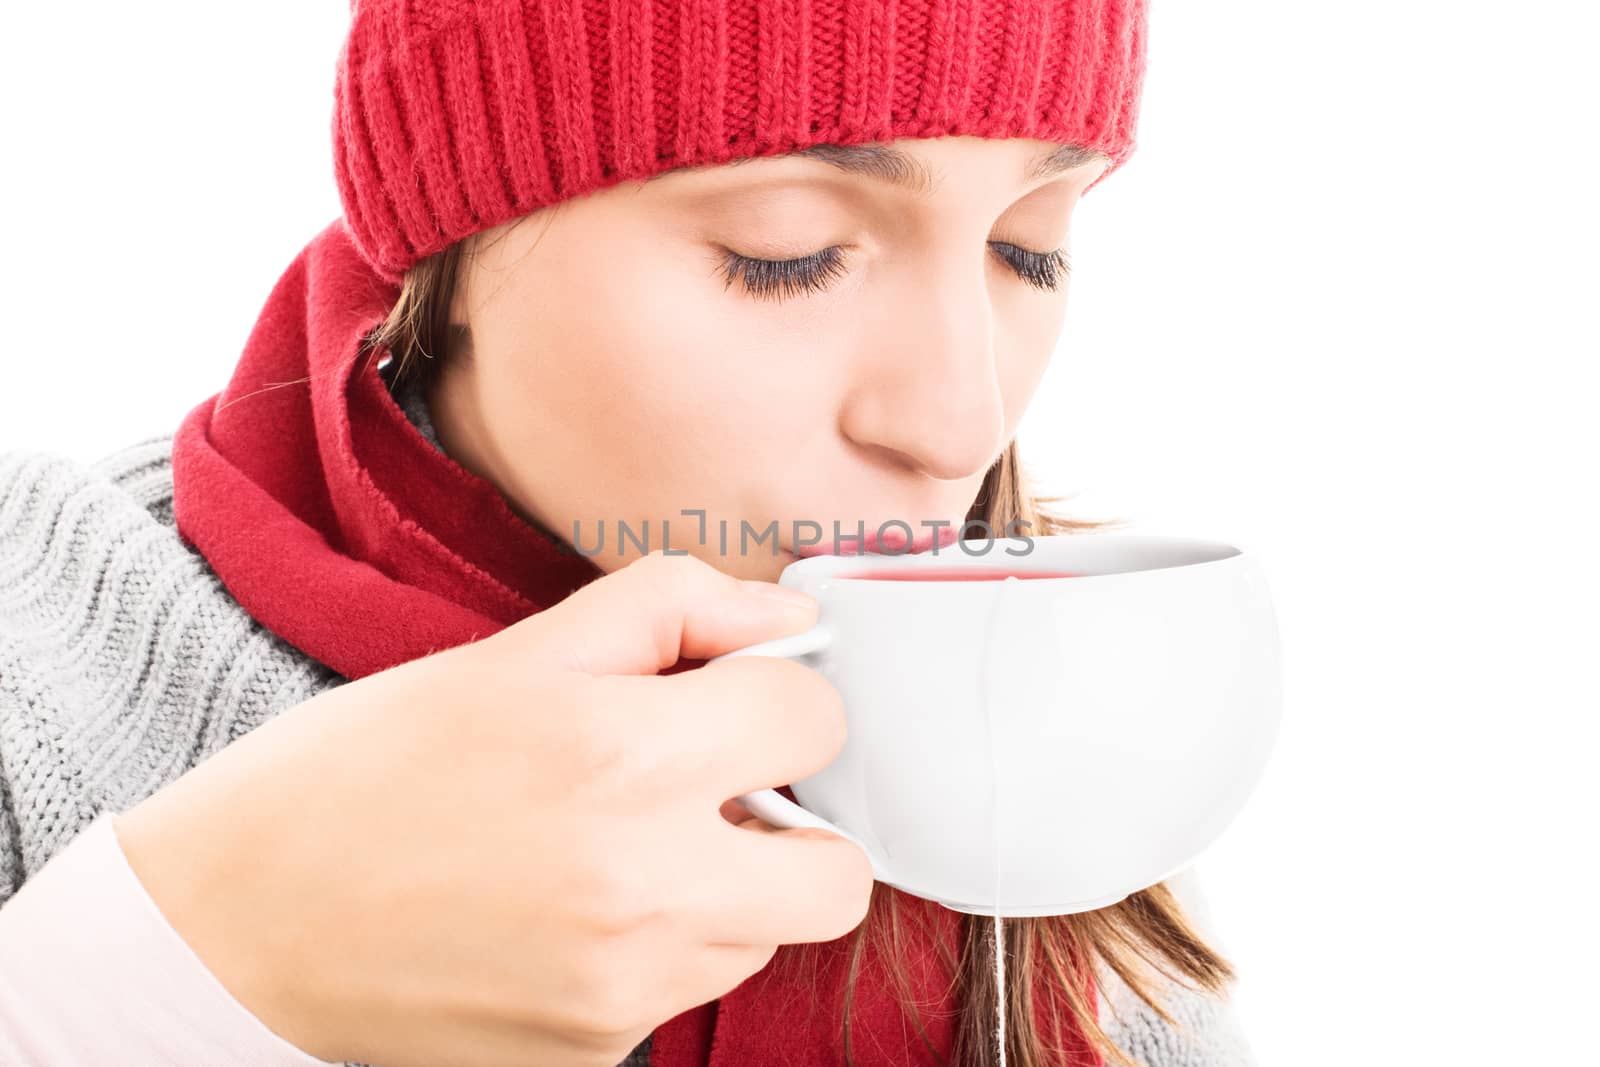 Close-up shot of a young girl wearing winter clothes and drinking a cup of hot drink, isolated on white background.